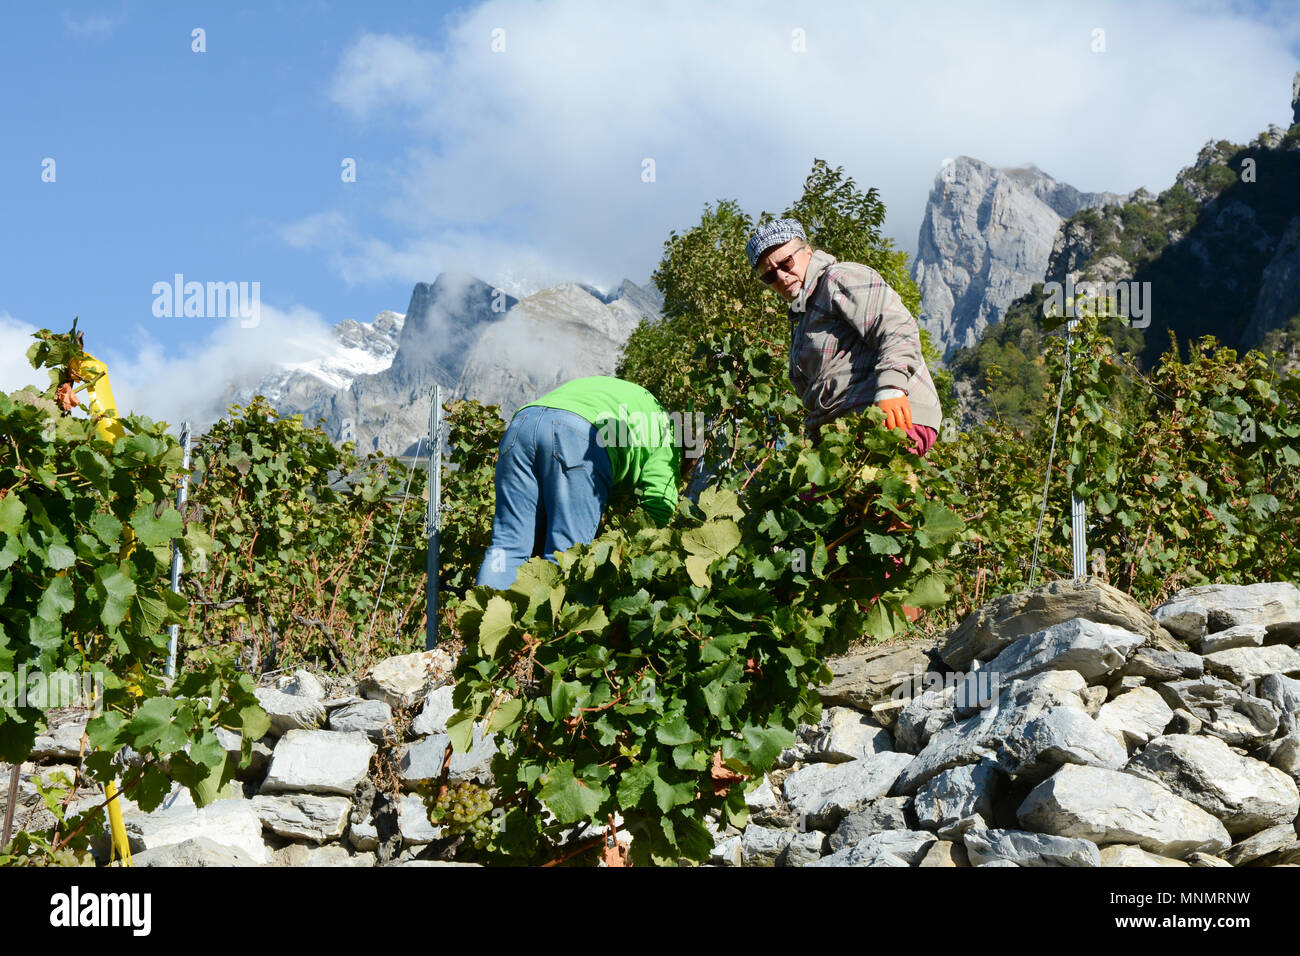 Wine grape pickers in a mountain vineyard during the harvest season near the town of Chamoson, Rhone Valley, Canton of Valais, Switzerland. Stock Photo